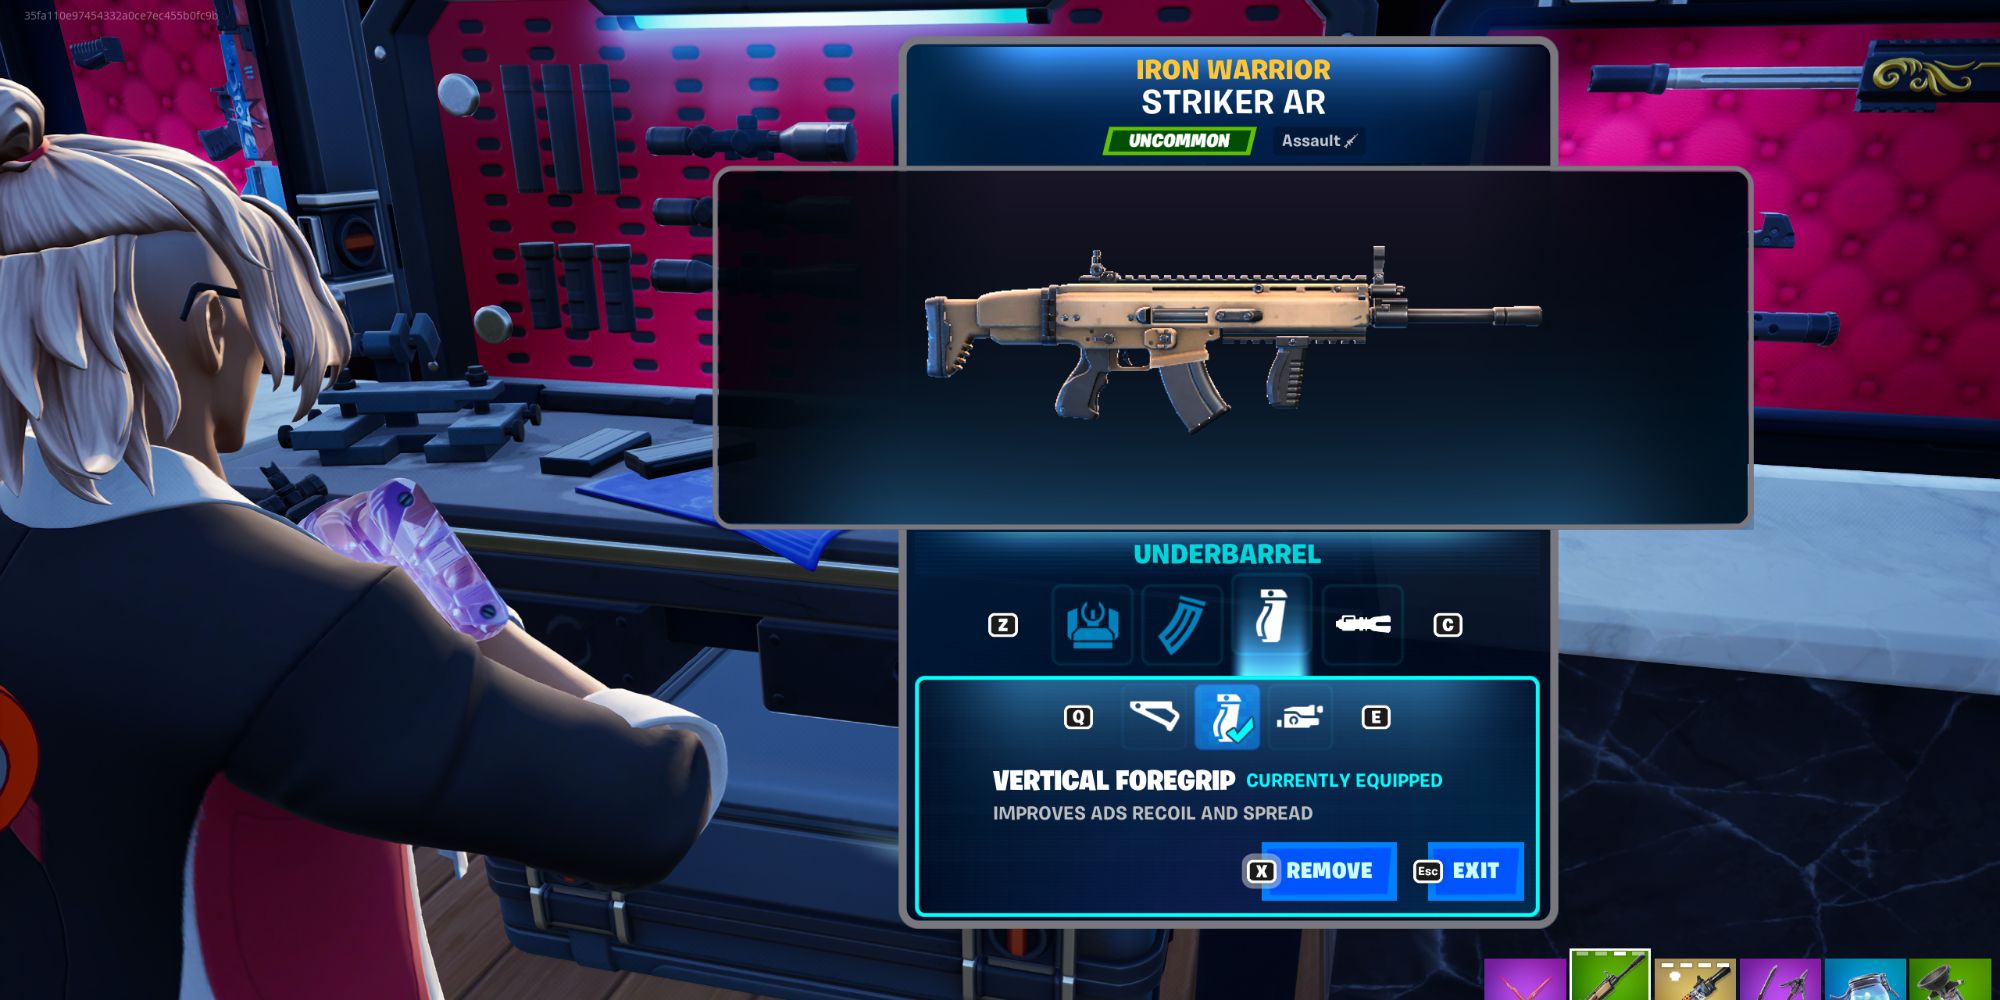 An image from Fortnite of the Vertical Foregrip Attachment, which reduces the aim down sights recoil and spread.